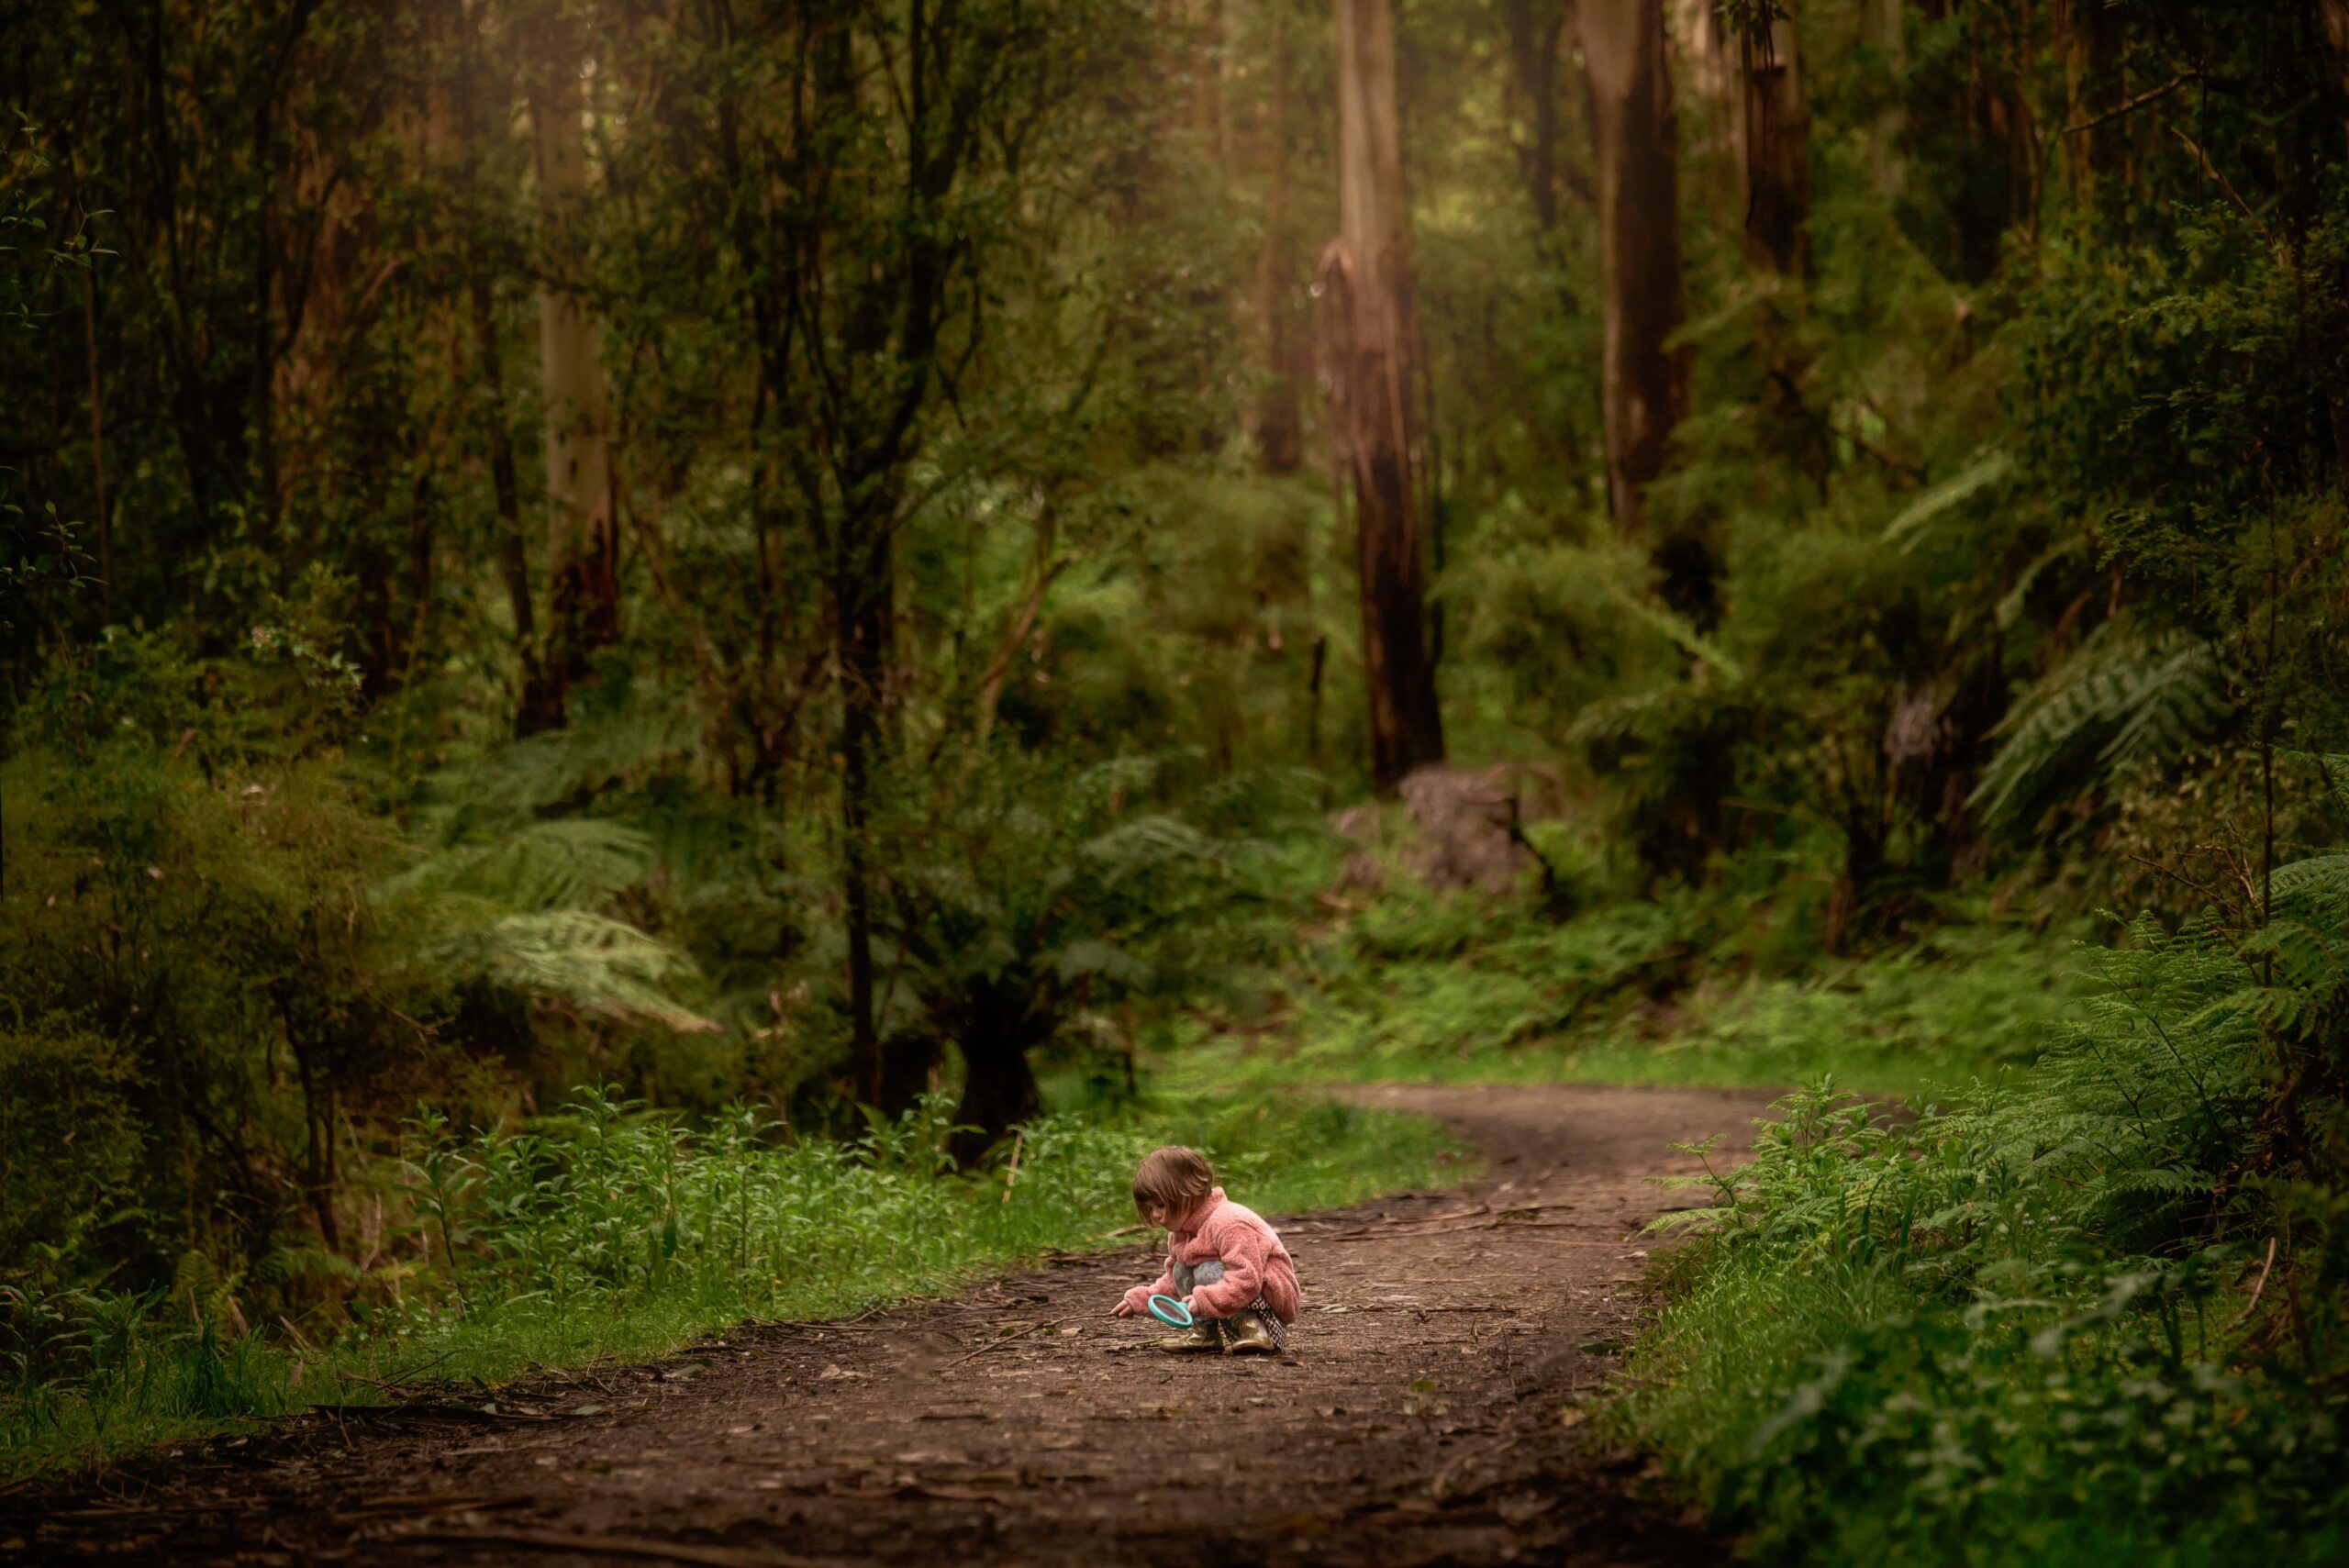 Little girl in pink jacket with a magnifying glass crouched down on a forest path